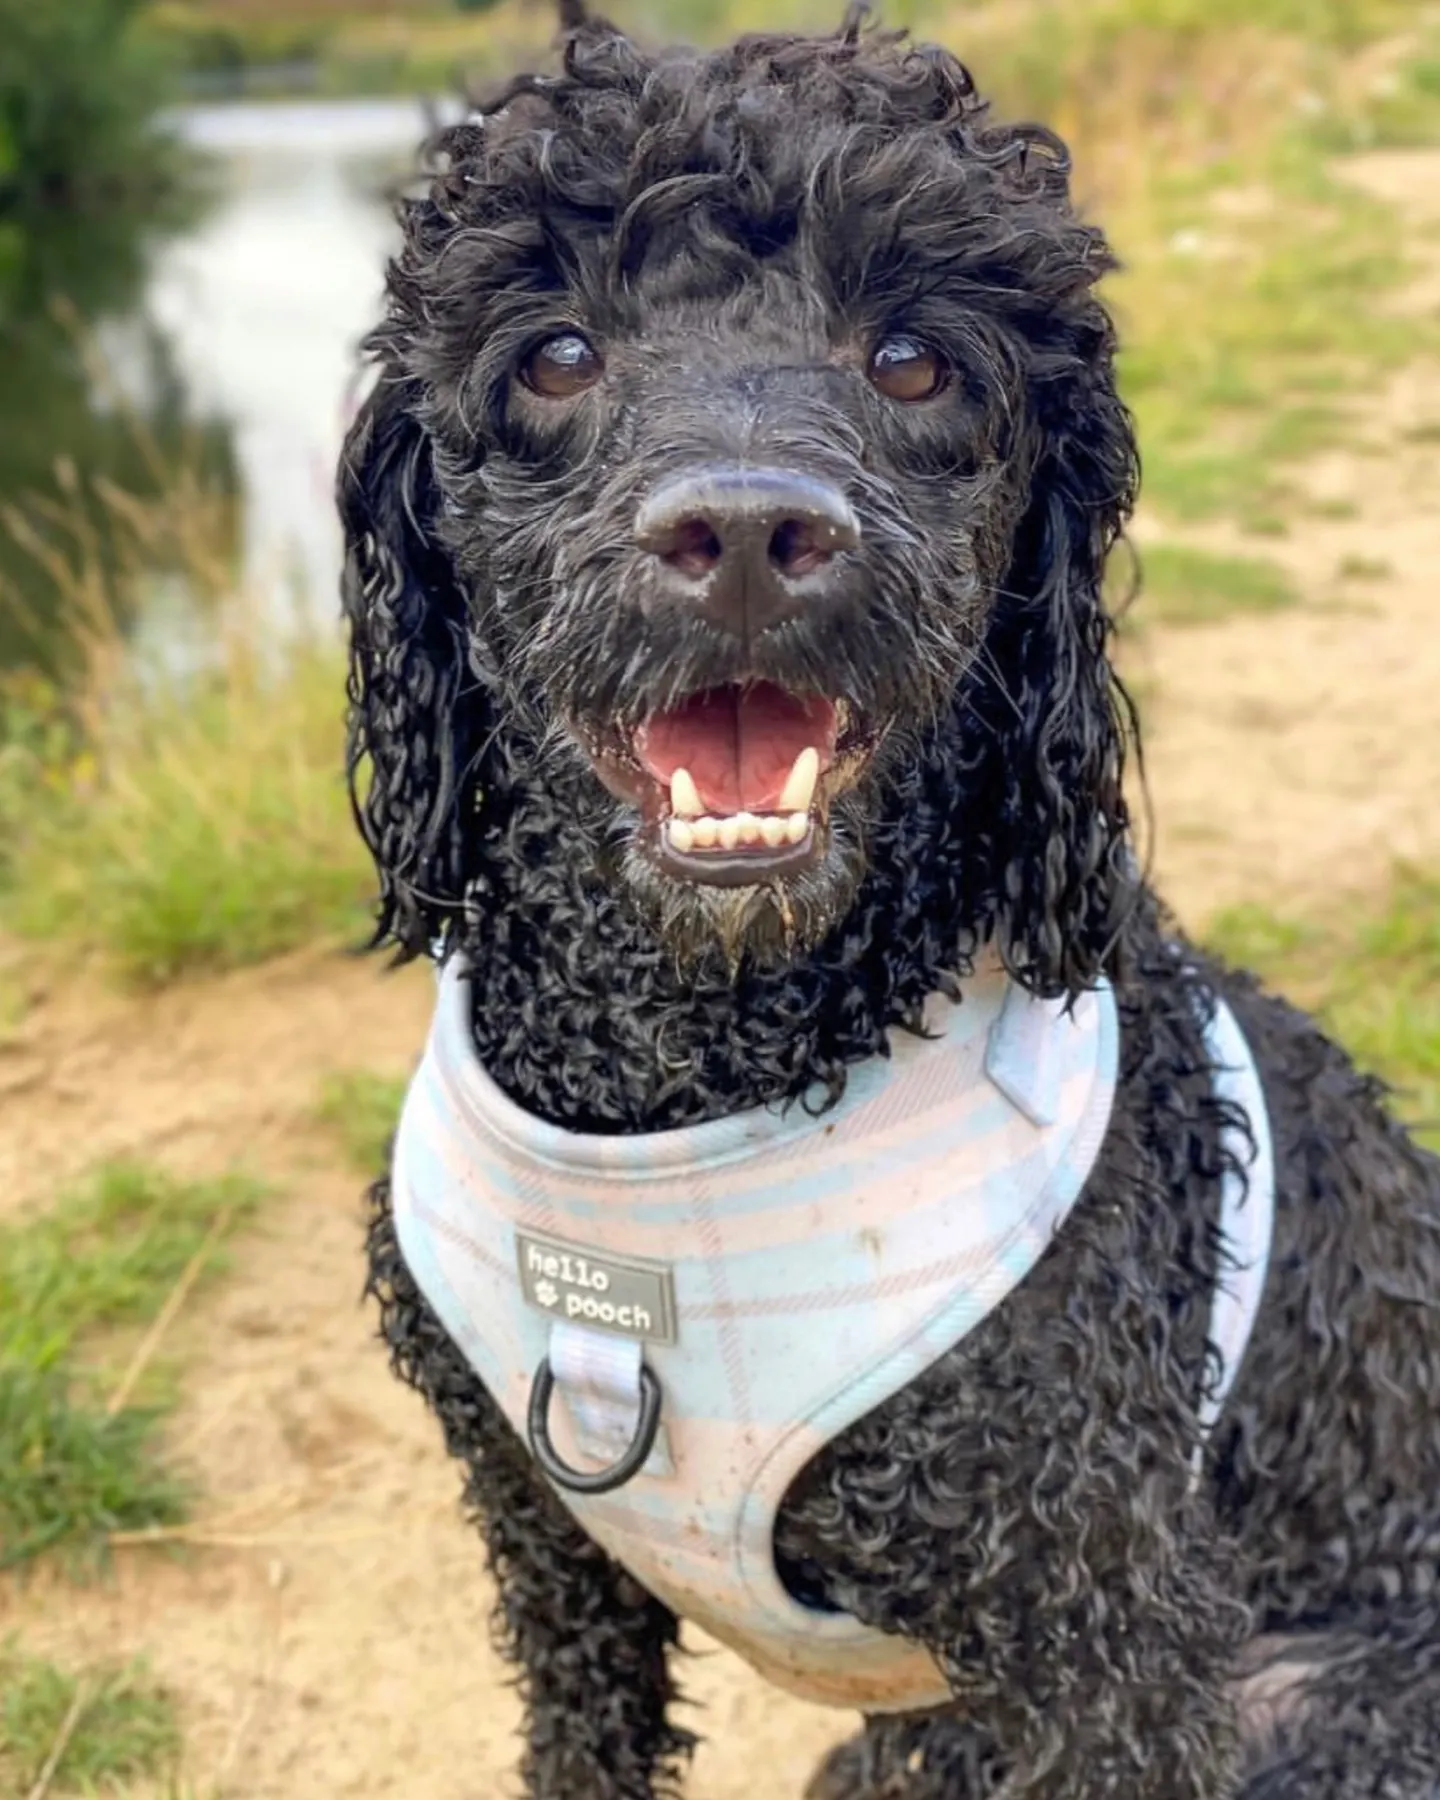 A black Labradoodle smiling adorably at the camera